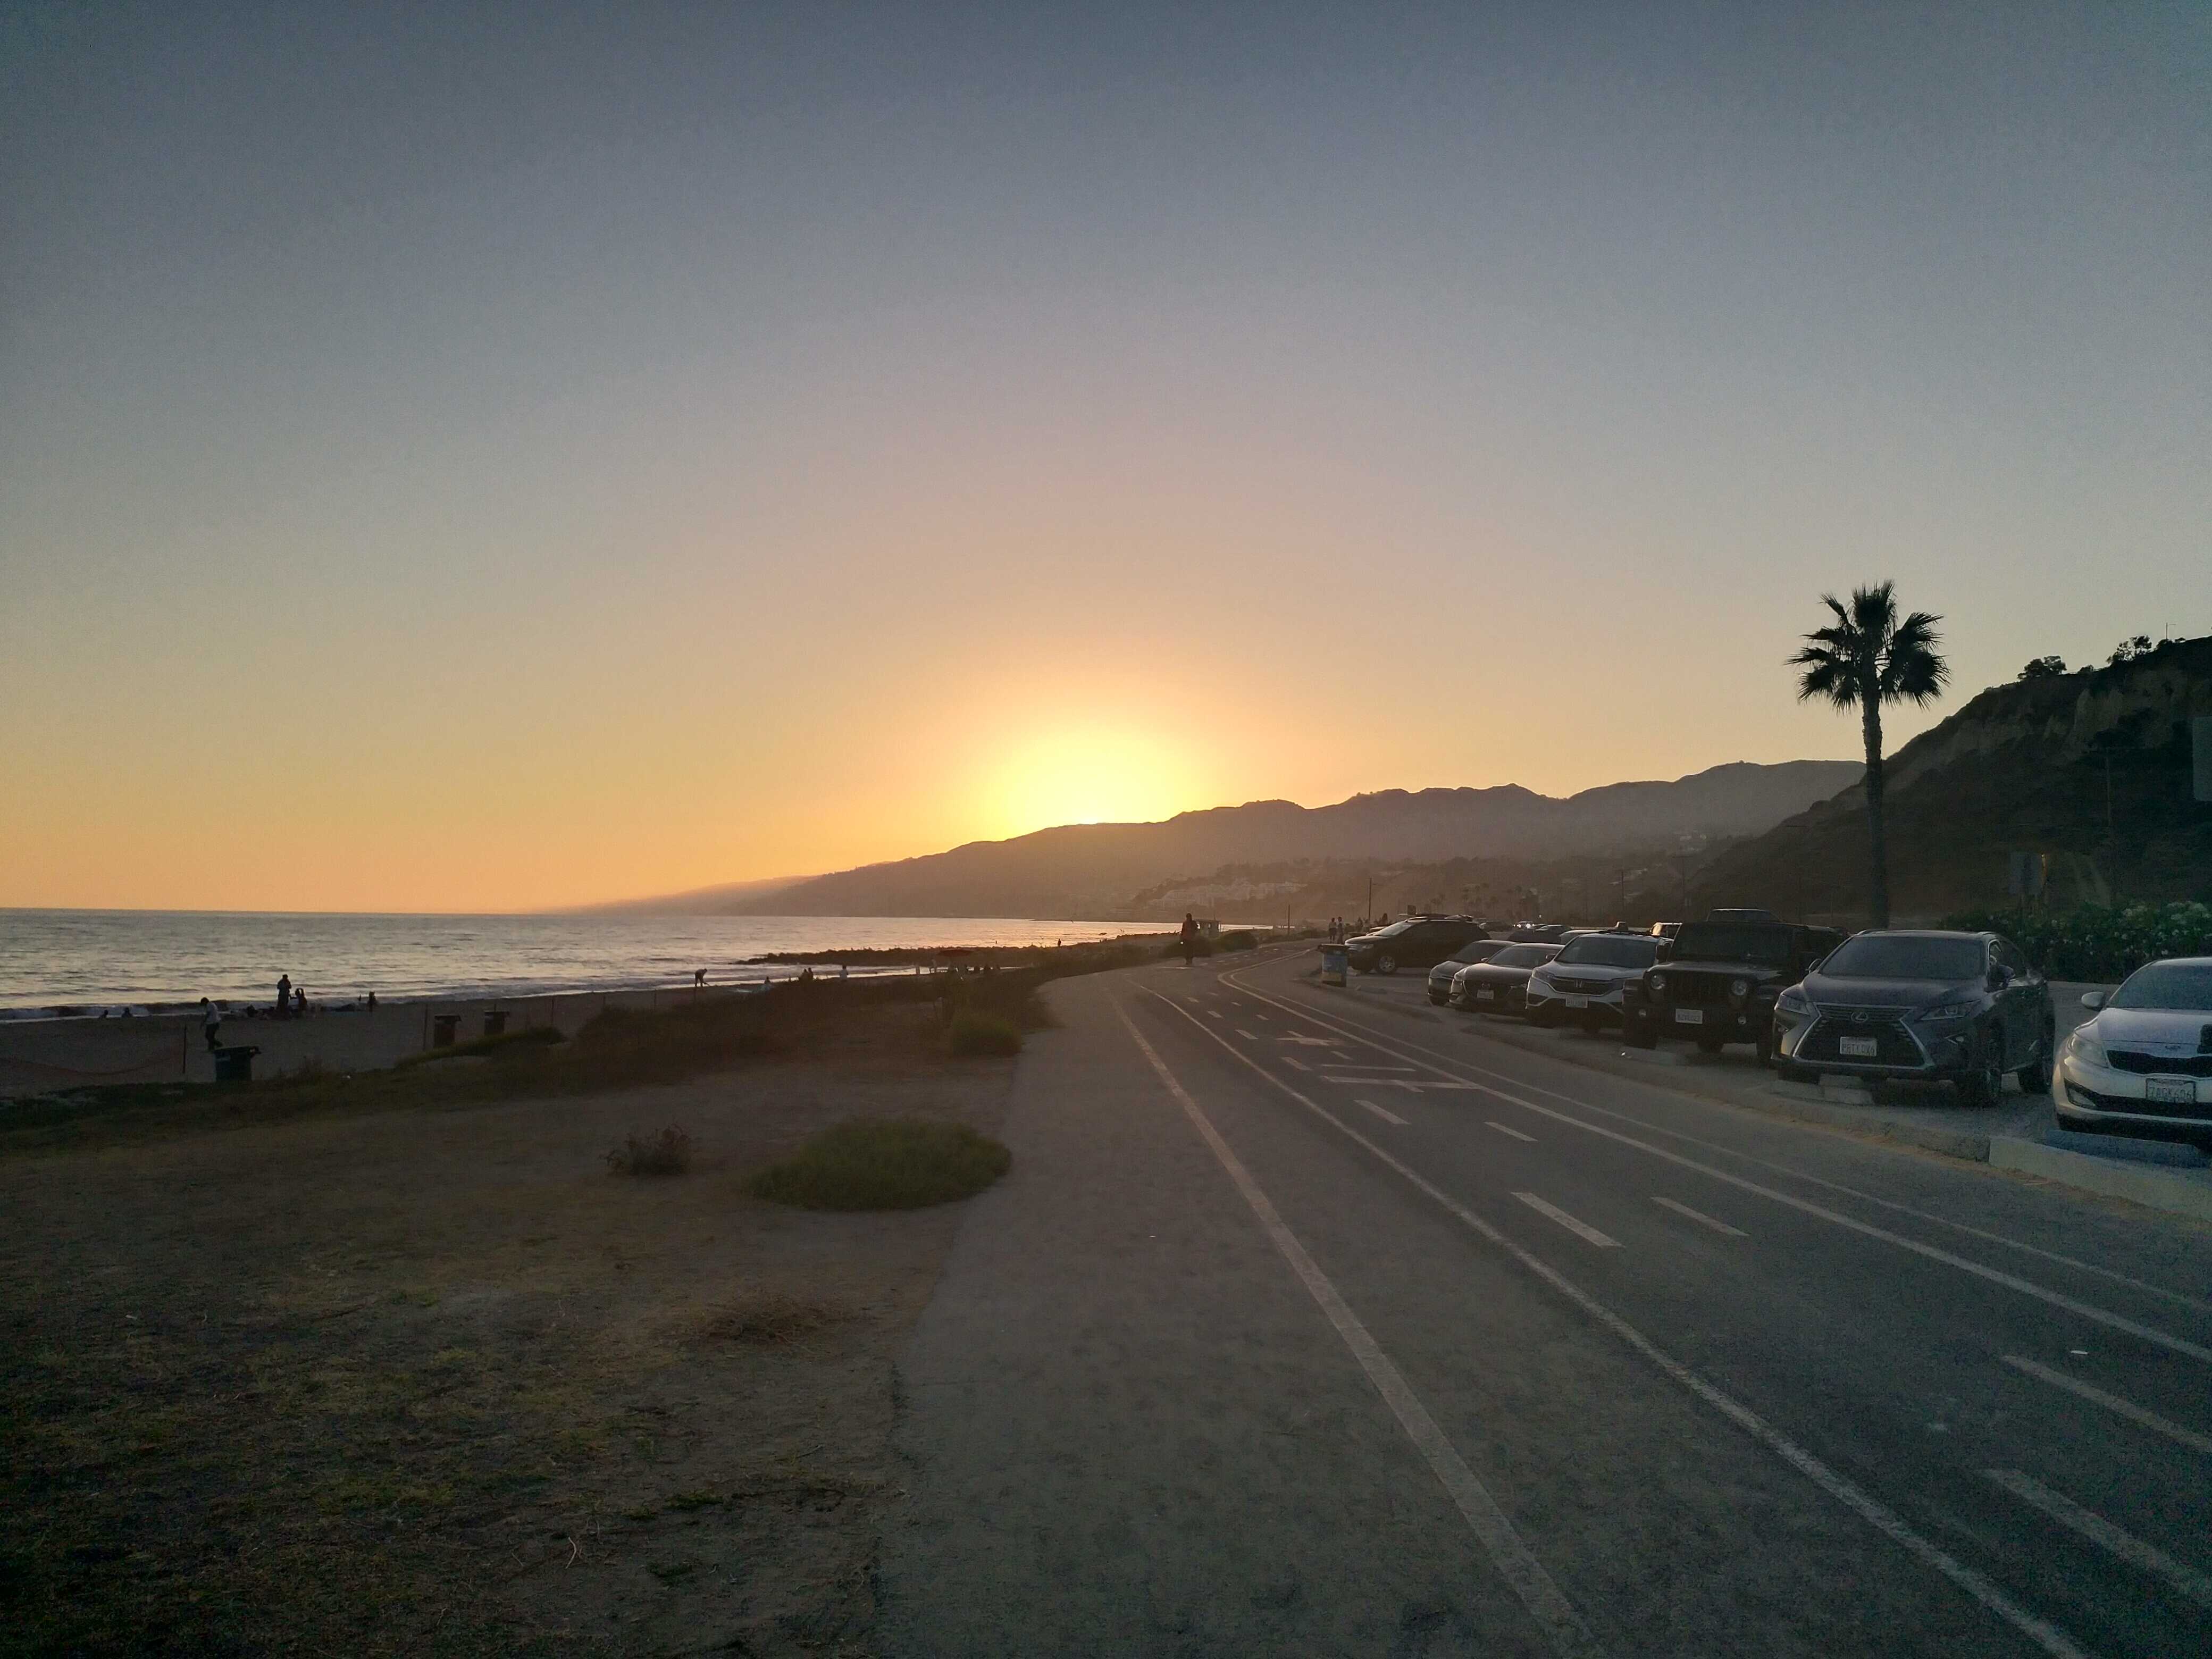 The setting sun as seen from the beach at Malibu.